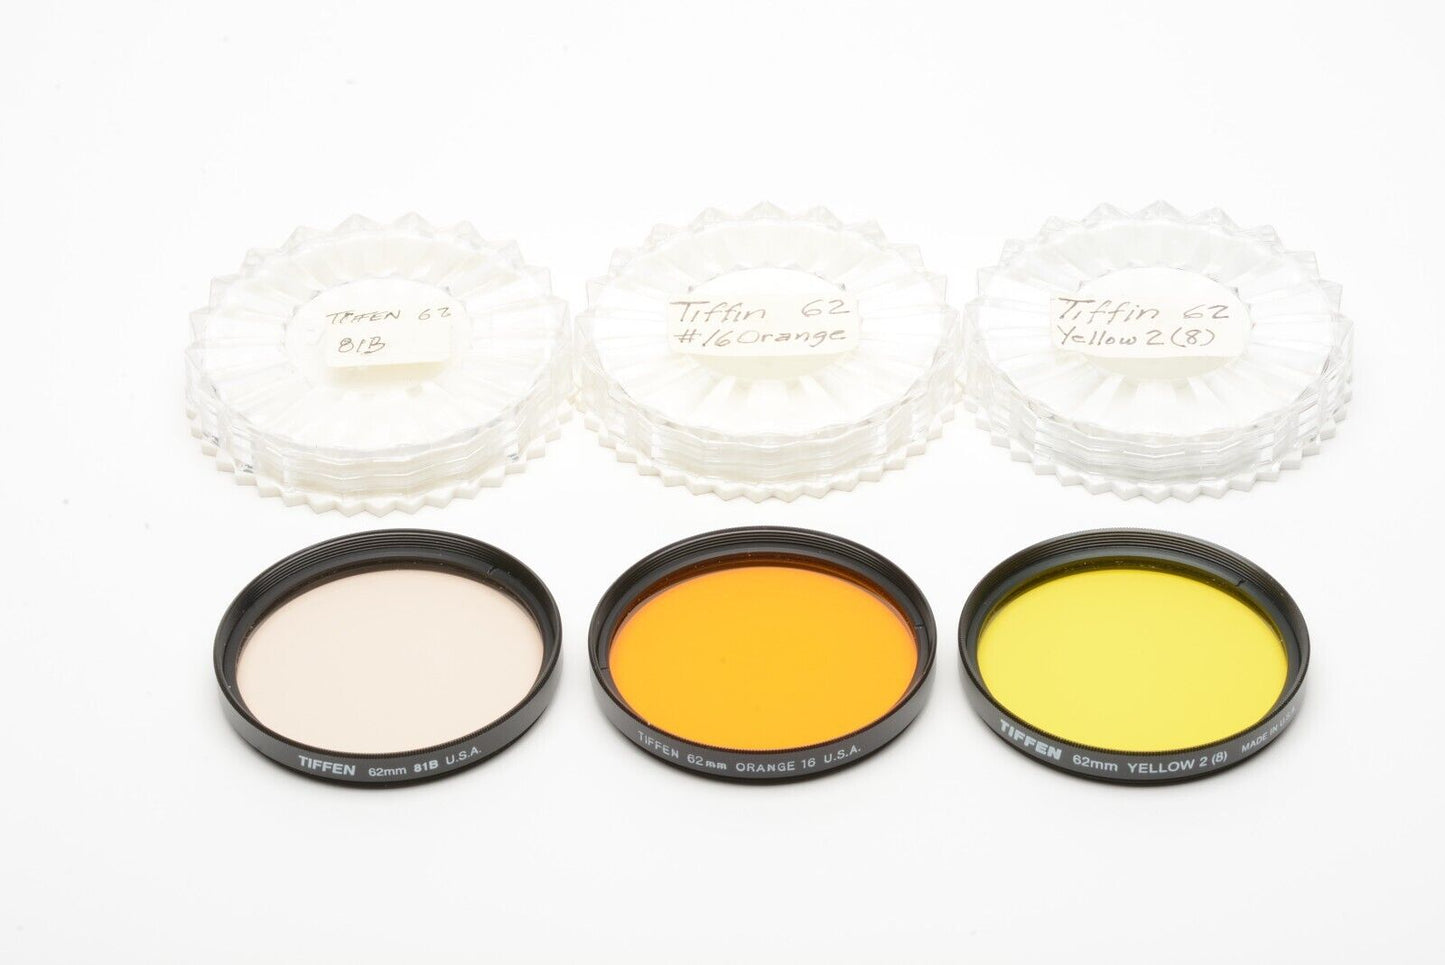 EXC+++ 62mm TIFFEN B&W CONTRAST FILTERS: YELLOW+ORANGE+81B WARM, BARELY USED